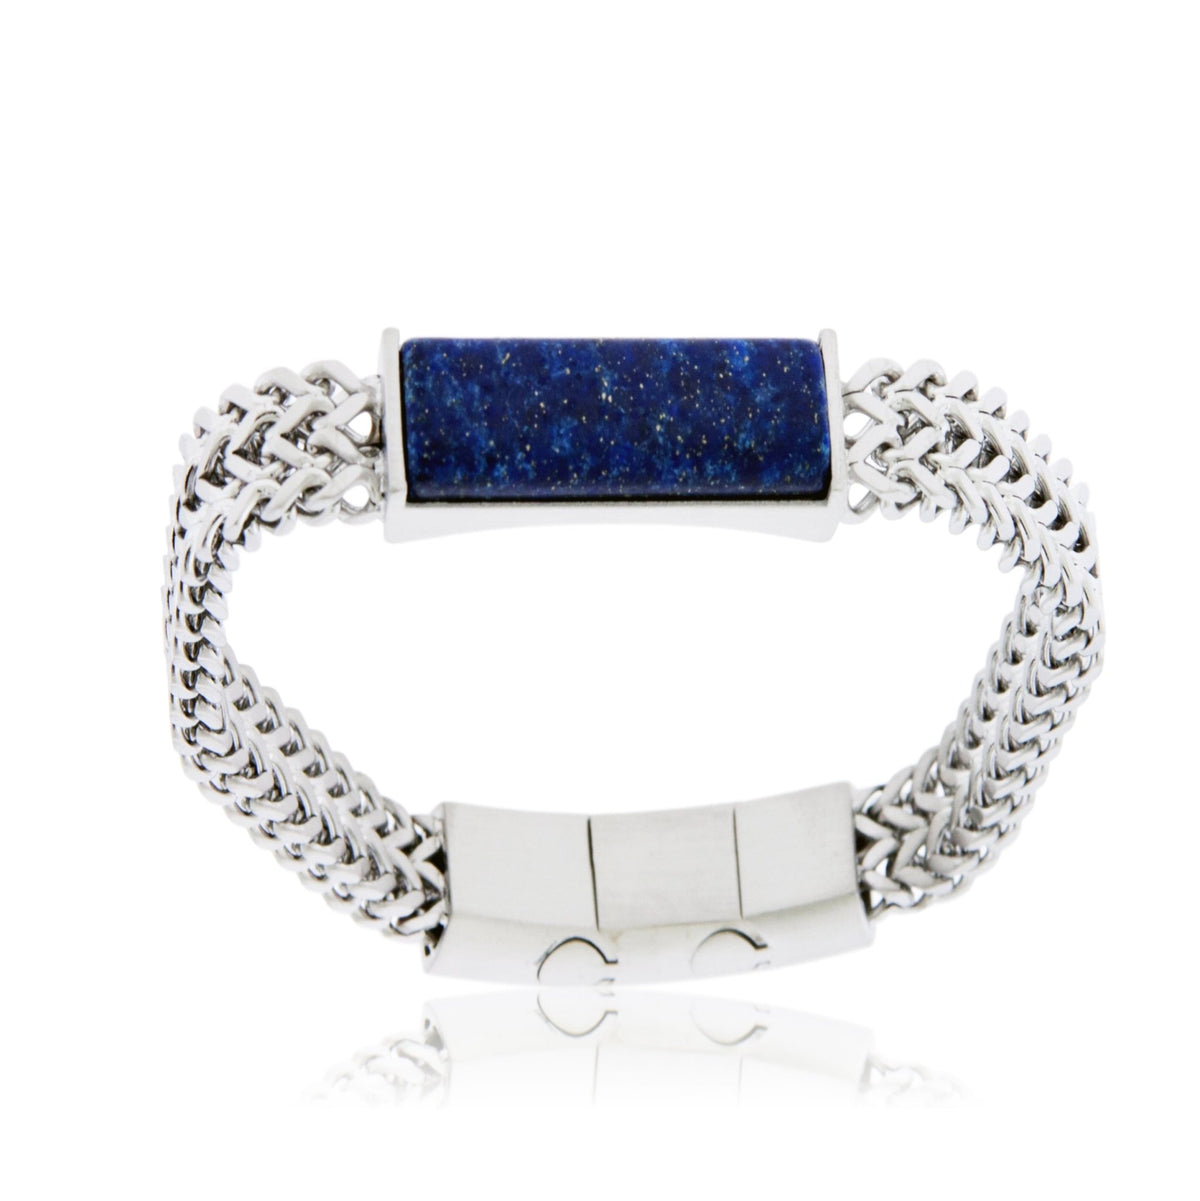 Stainless Steel Double Franco Chain with Lapis Stone Bracelet - Park City Jewelers